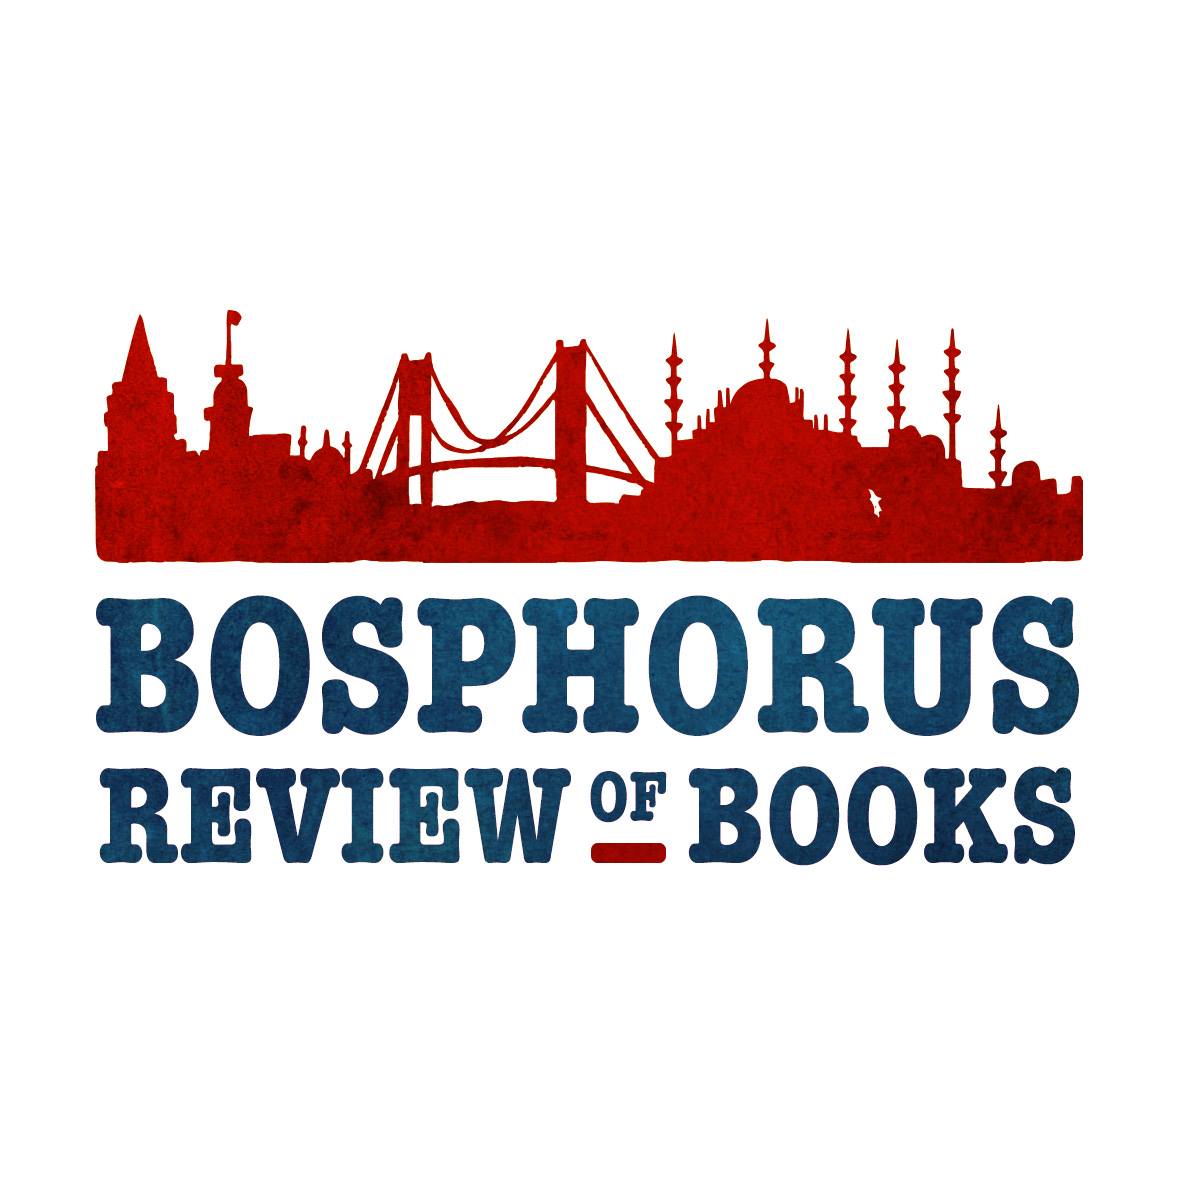 The Bosphorus Review of Books